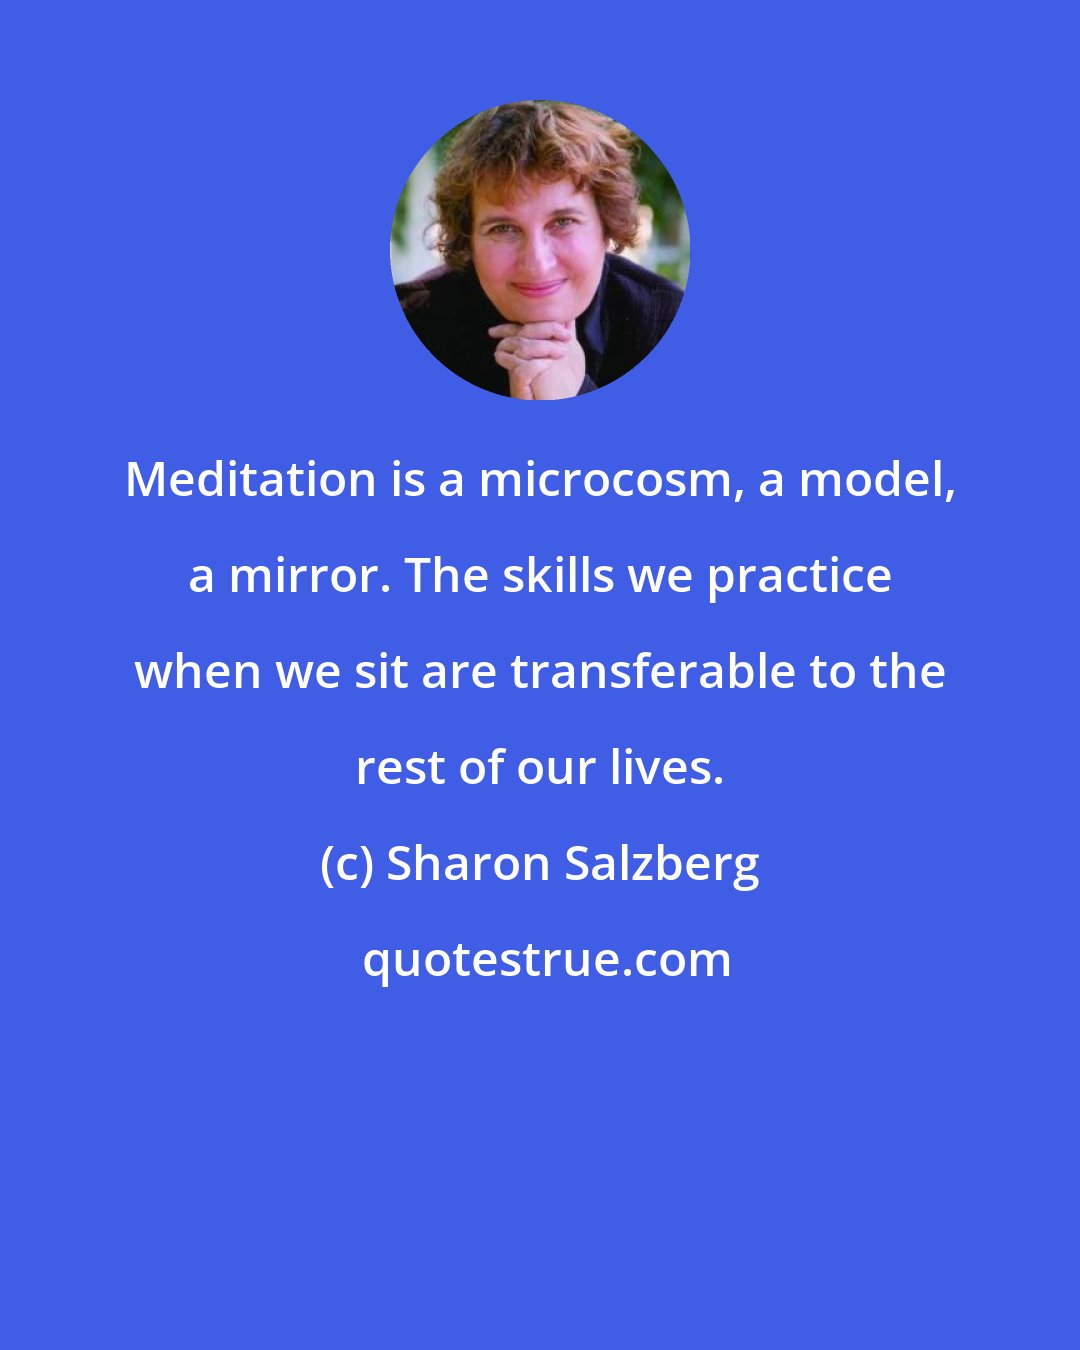 Sharon Salzberg: Meditation is a microcosm, a model, a mirror. The skills we practice when we sit are transferable to the rest of our lives.